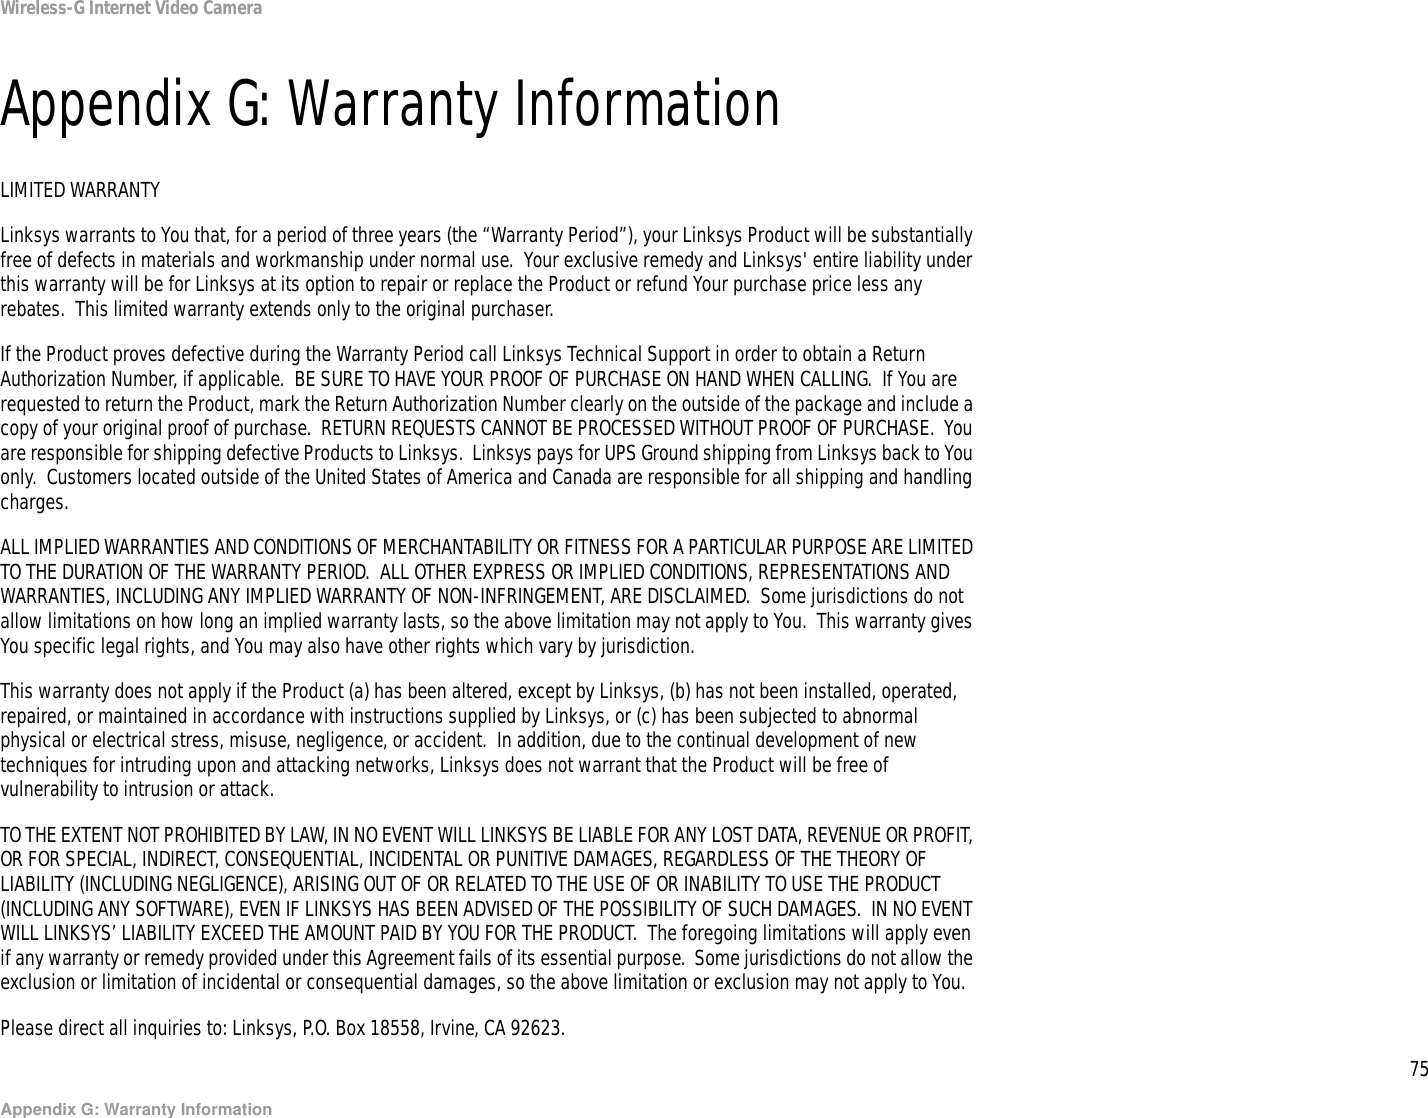 75Appendix G: Warranty InformationWireless-G Internet Video CameraAppendix G: Warranty InformationLIMITED WARRANTYLinksys warrants to You that, for a period of three years (the “Warranty Period”), your Linksys Product will be substantially free of defects in materials and workmanship under normal use.  Your exclusive remedy and Linksys&apos; entire liability under this warranty will be for Linksys at its option to repair or replace the Product or refund Your purchase price less any rebates.  This limited warranty extends only to the original purchaser.  If the Product proves defective during the Warranty Period call Linksys Technical Support in order to obtain a Return Authorization Number, if applicable.  BE SURE TO HAVE YOUR PROOF OF PURCHASE ON HAND WHEN CALLING.  If You are requested to return the Product, mark the Return Authorization Number clearly on the outside of the package and include a copy of your original proof of purchase.  RETURN REQUESTS CANNOT BE PROCESSED WITHOUT PROOF OF PURCHASE.  You are responsible for shipping defective Products to Linksys.  Linksys pays for UPS Ground shipping from Linksys back to You only.  Customers located outside of the United States of America and Canada are responsible for all shipping and handling charges. ALL IMPLIED WARRANTIES AND CONDITIONS OF MERCHANTABILITY OR FITNESS FOR A PARTICULAR PURPOSE ARE LIMITED TO THE DURATION OF THE WARRANTY PERIOD.  ALL OTHER EXPRESS OR IMPLIED CONDITIONS, REPRESENTATIONS AND WARRANTIES, INCLUDING ANY IMPLIED WARRANTY OF NON-INFRINGEMENT, ARE DISCLAIMED.  Some jurisdictions do not allow limitations on how long an implied warranty lasts, so the above limitation may not apply to You.  This warranty gives You specific legal rights, and You may also have other rights which vary by jurisdiction.This warranty does not apply if the Product (a) has been altered, except by Linksys, (b) has not been installed, operated, repaired, or maintained in accordance with instructions supplied by Linksys, or (c) has been subjected to abnormal physical or electrical stress, misuse, negligence, or accident.  In addition, due to the continual development of new techniques for intruding upon and attacking networks, Linksys does not warrant that the Product will be free of vulnerability to intrusion or attack.TO THE EXTENT NOT PROHIBITED BY LAW, IN NO EVENT WILL LINKSYS BE LIABLE FOR ANY LOST DATA, REVENUE OR PROFIT, OR FOR SPECIAL, INDIRECT, CONSEQUENTIAL, INCIDENTAL OR PUNITIVE DAMAGES, REGARDLESS OF THE THEORY OF LIABILITY (INCLUDING NEGLIGENCE), ARISING OUT OF OR RELATED TO THE USE OF OR INABILITY TO USE THE PRODUCT (INCLUDING ANY SOFTWARE), EVEN IF LINKSYS HAS BEEN ADVISED OF THE POSSIBILITY OF SUCH DAMAGES.  IN NO EVENT WILL LINKSYS’ LIABILITY EXCEED THE AMOUNT PAID BY YOU FOR THE PRODUCT.  The foregoing limitations will apply even if any warranty or remedy provided under this Agreement fails of its essential purpose.  Some jurisdictions do not allow the exclusion or limitation of incidental or consequential damages, so the above limitation or exclusion may not apply to You.Please direct all inquiries to: Linksys, P.O. Box 18558, Irvine, CA 92623.